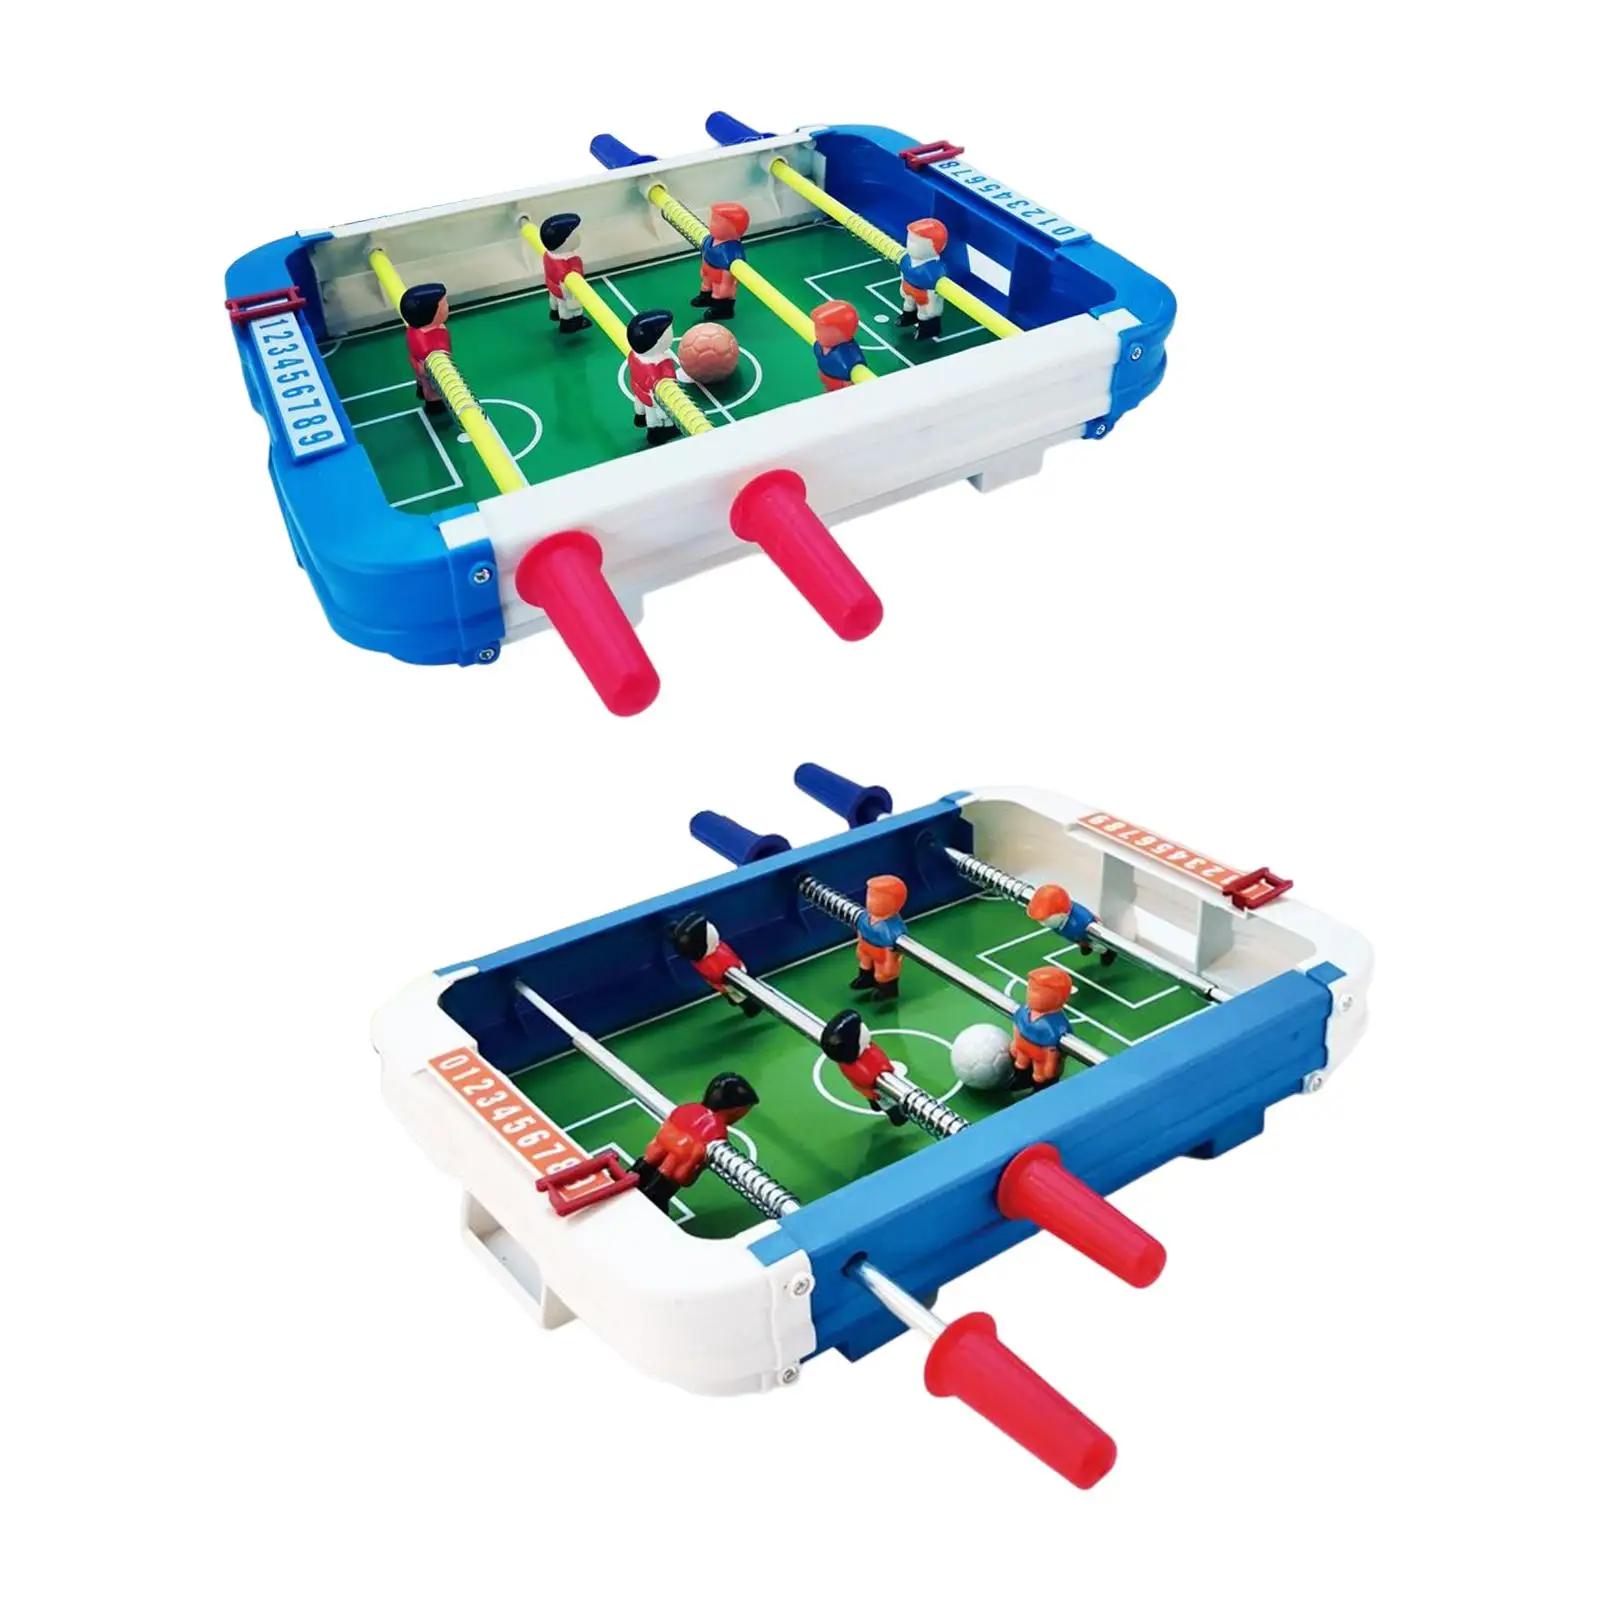 Small Foosball Table, Tabletop Football Games Motor Skills Easy to Store Entertainment for Parent Child Interaction Children